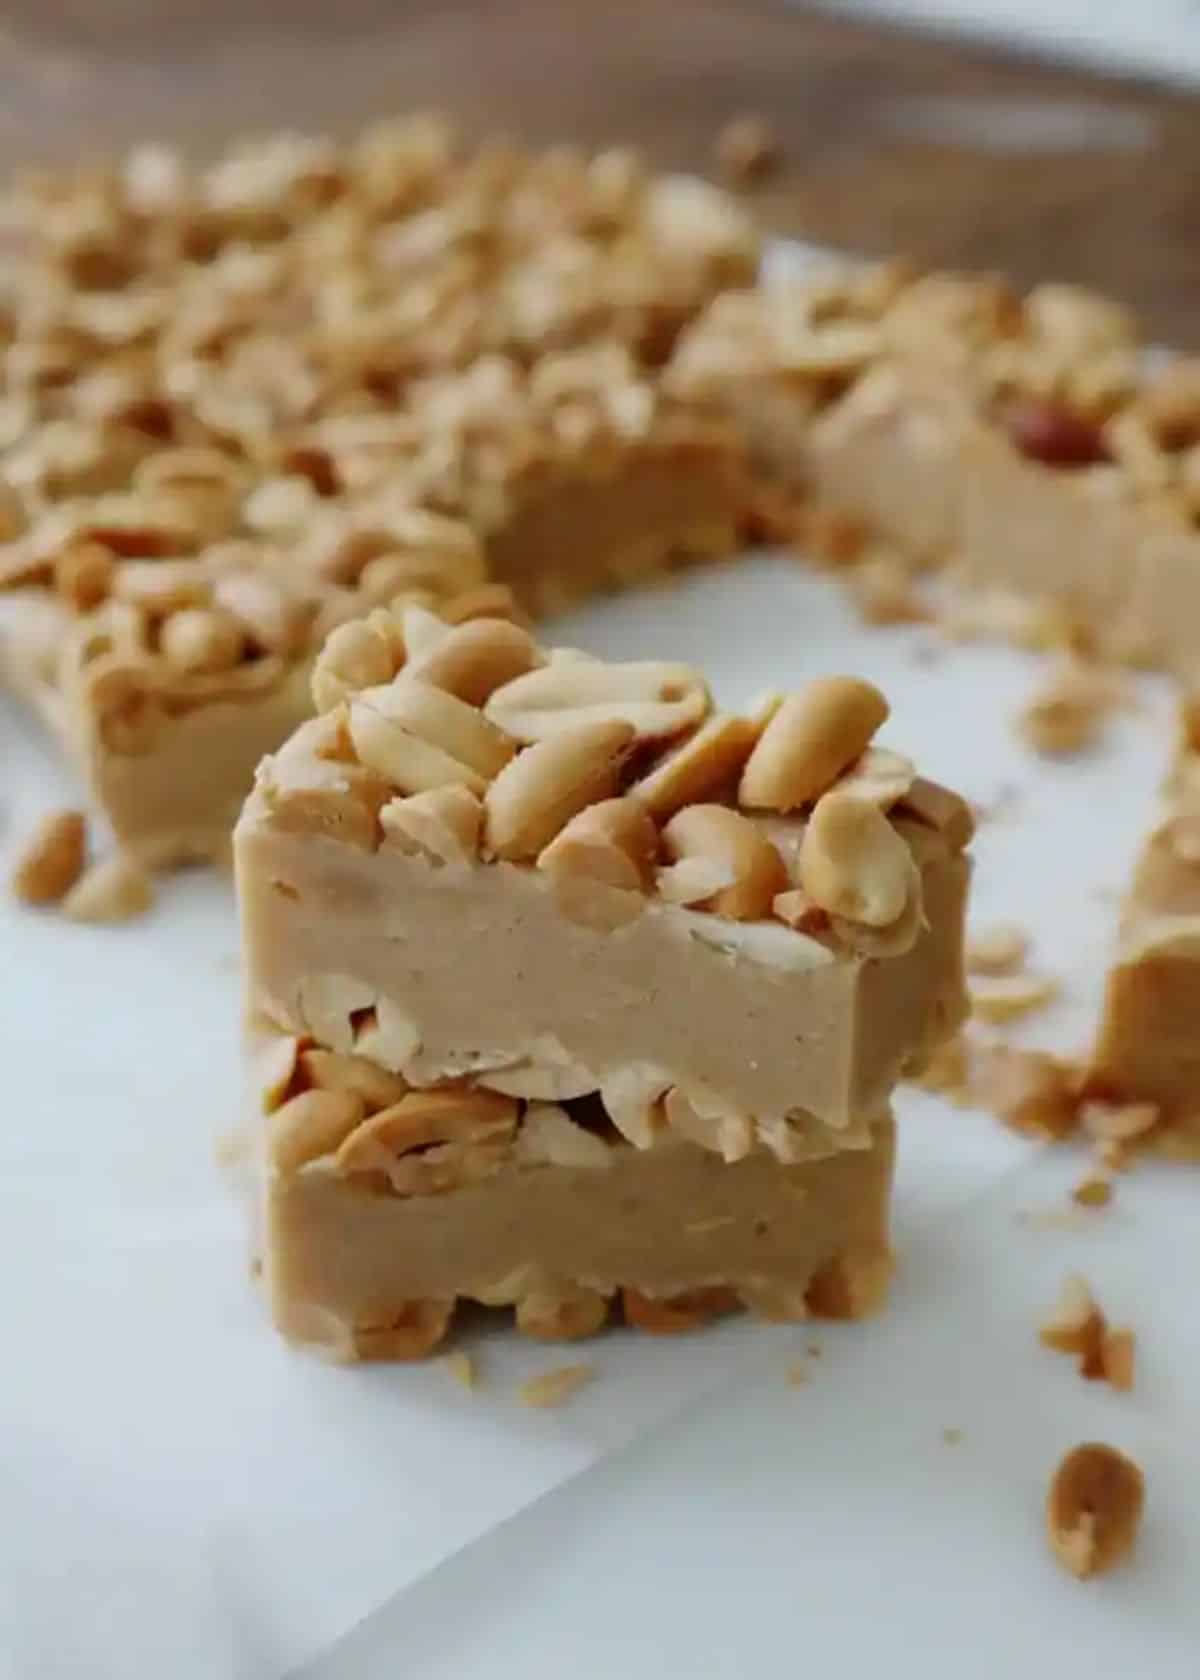 Delicious salted nut candy bars on a table.